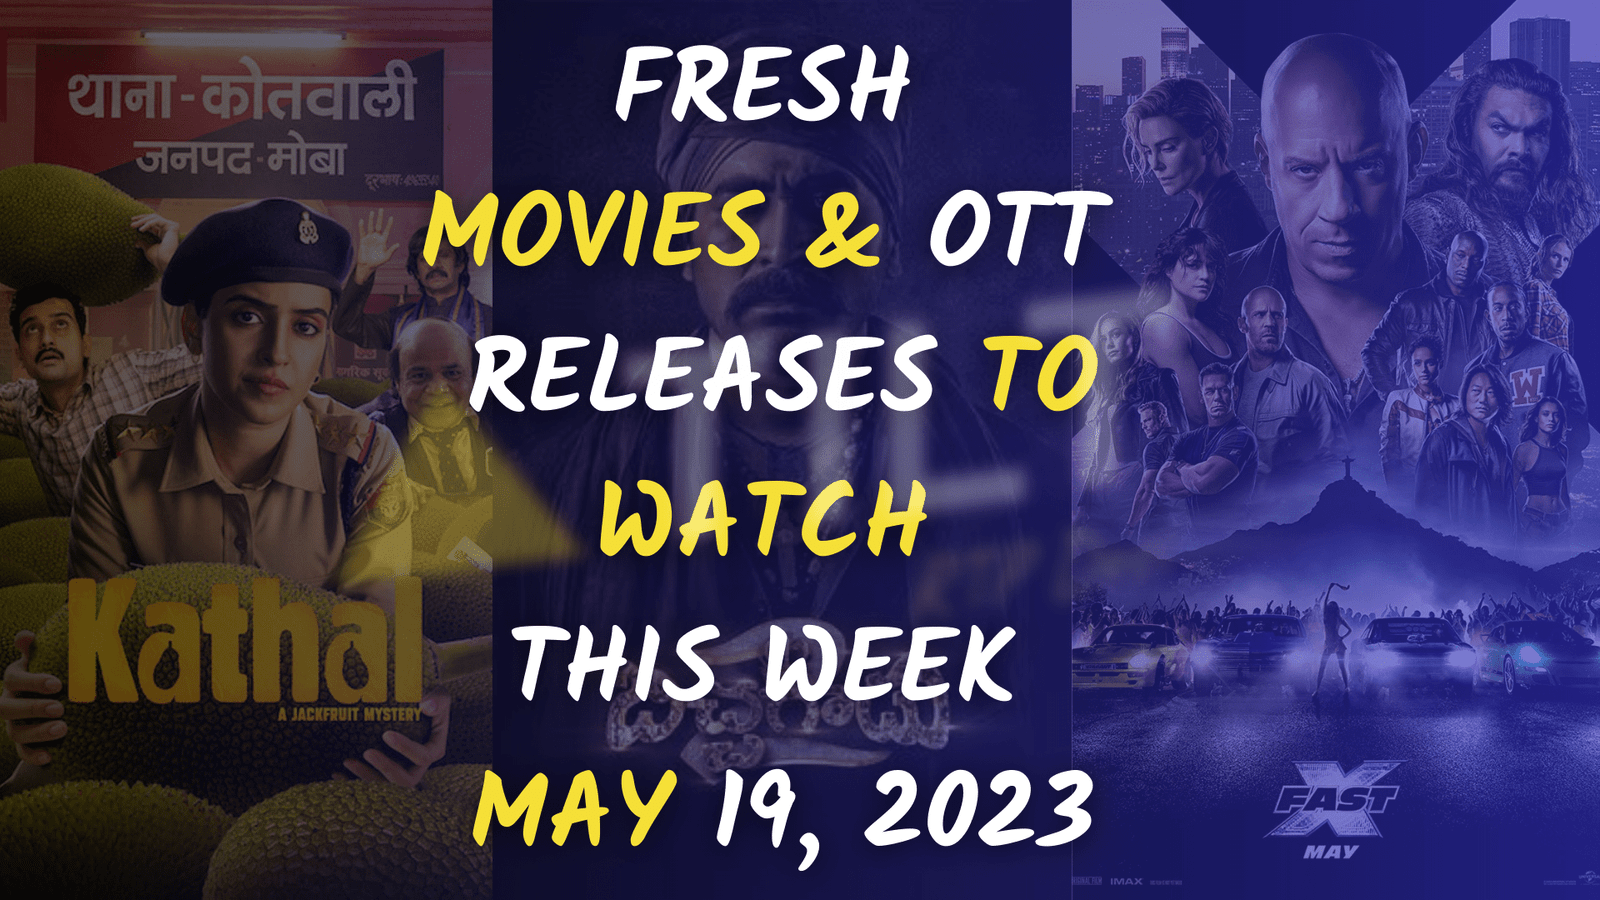 Fresh Movie And OTT Releases To Watch This Week May 19, 2023